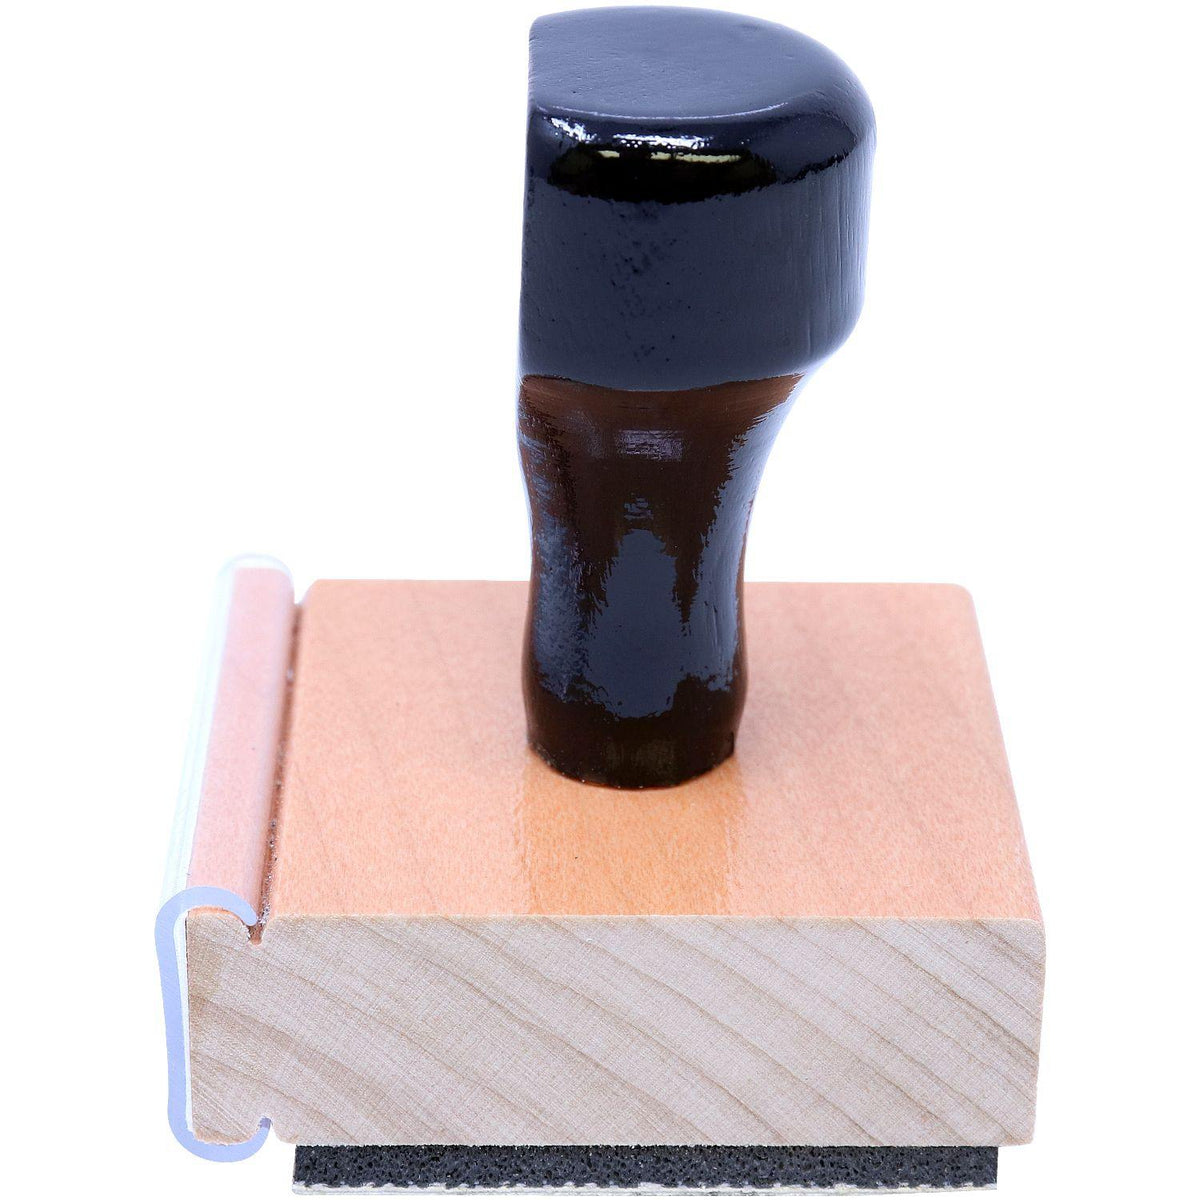 Landscape Architect Regular Rubber Stamp of Seal - Engineer Seal Stamps - Stamp Type_Hand Stamp, Type of Use_Professional